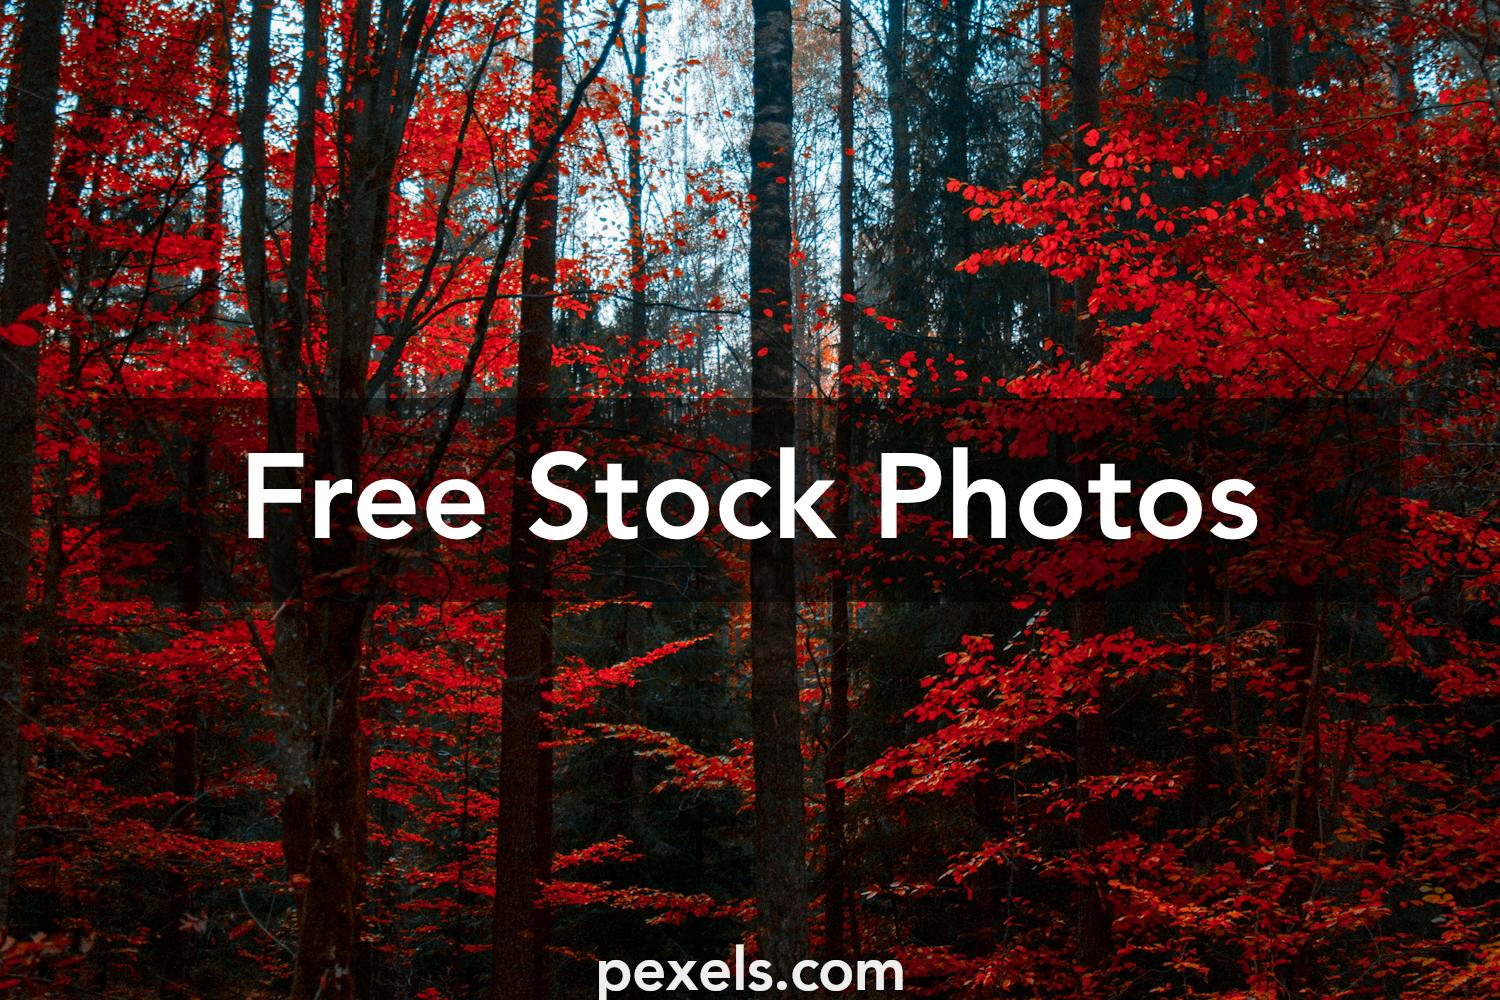 What are some websites to download high-definition tree backgrounds for photo editing?